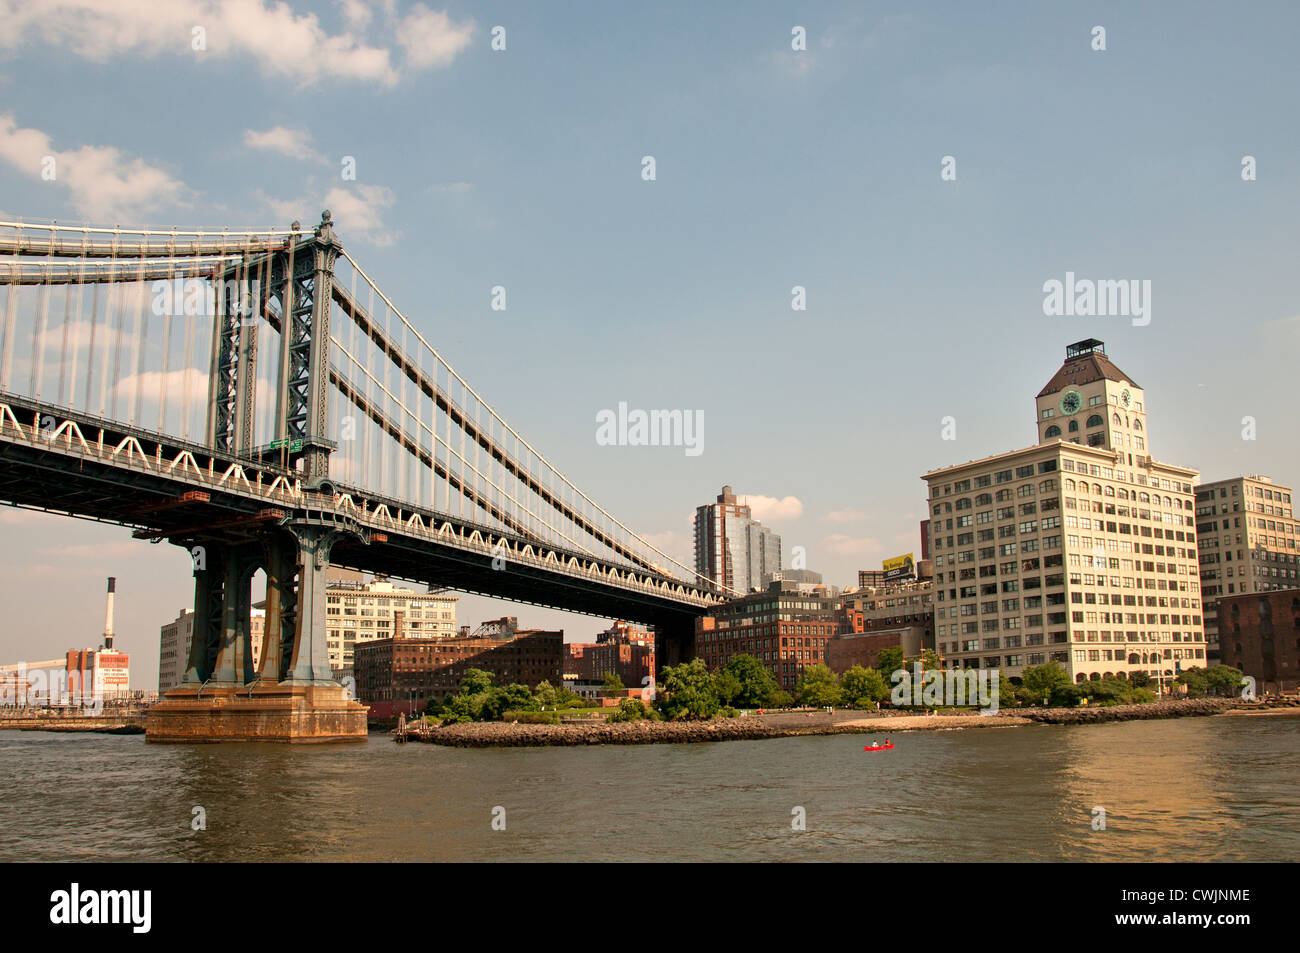 Dumbo Pont de Manhattan Brooklyn Heights East River New York City United States Banque D'Images